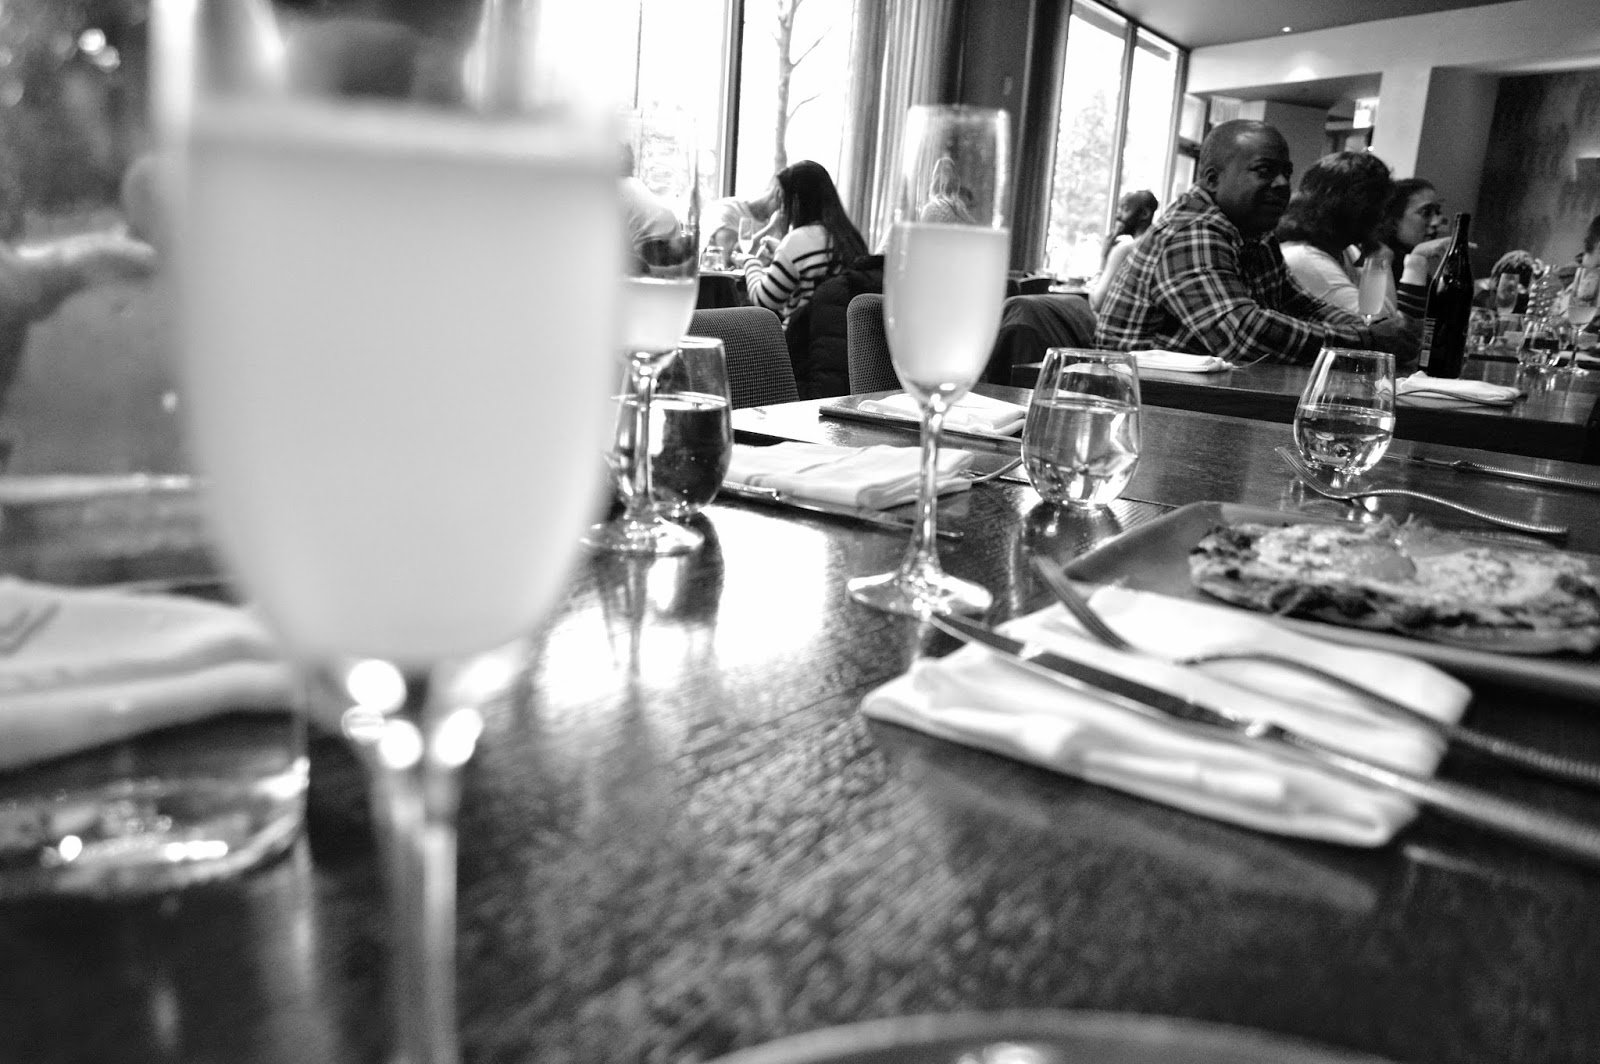 Saturday Brunch at The Cecil – Harlem